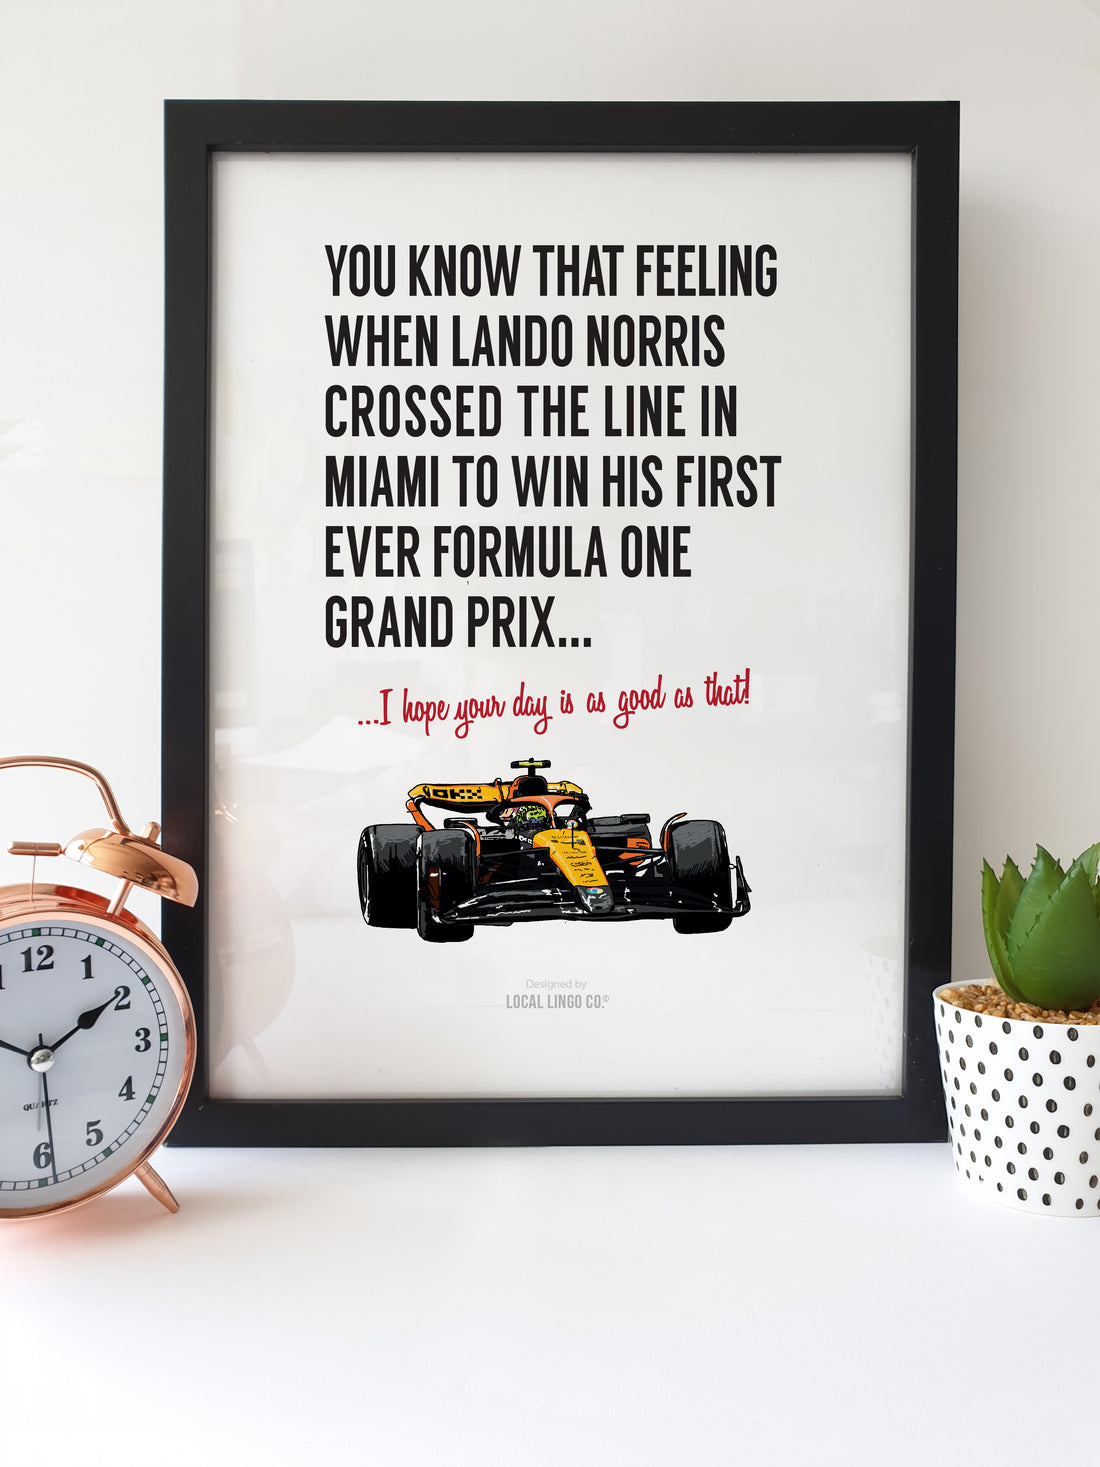 Framed artwork featuring a quote about Lando Norris winning his first Formula 1 Grand Prix in Miami, with an illustration of his McLaren F1 car. The text reads, "You know that feeling when Lando Norris crossed the line in Miami to win his first ever Formula One Grand Prix... I hope your day is as good as that!" The artwork is placed on a white desk next to a copper alarm clock and a small potted plant. designed by local lingo